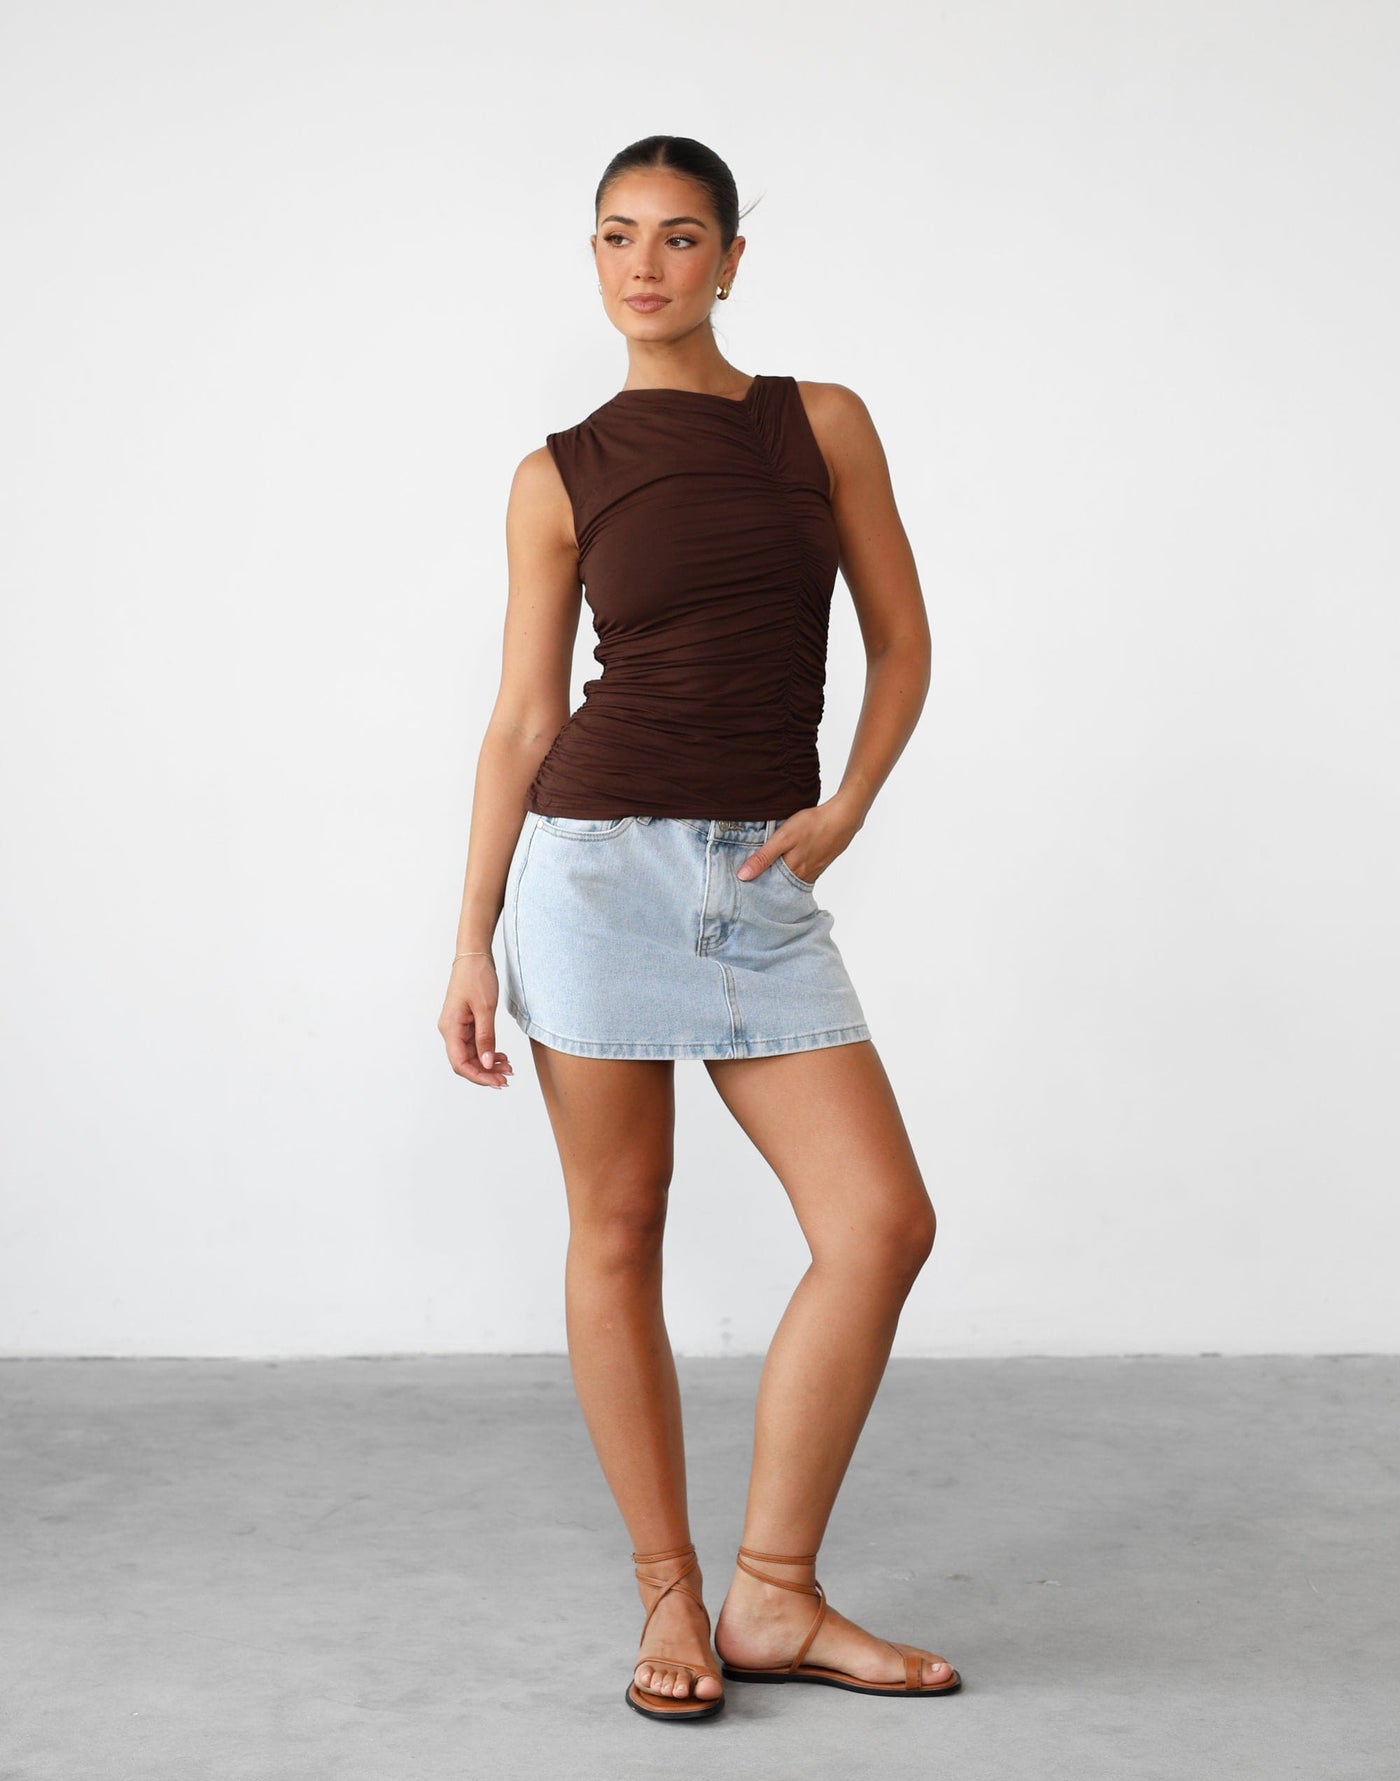 Delphine Tank Top (Chocolate) - Bodycon Jersey Gathered Detail Top - Women's Top - Charcoal Clothing